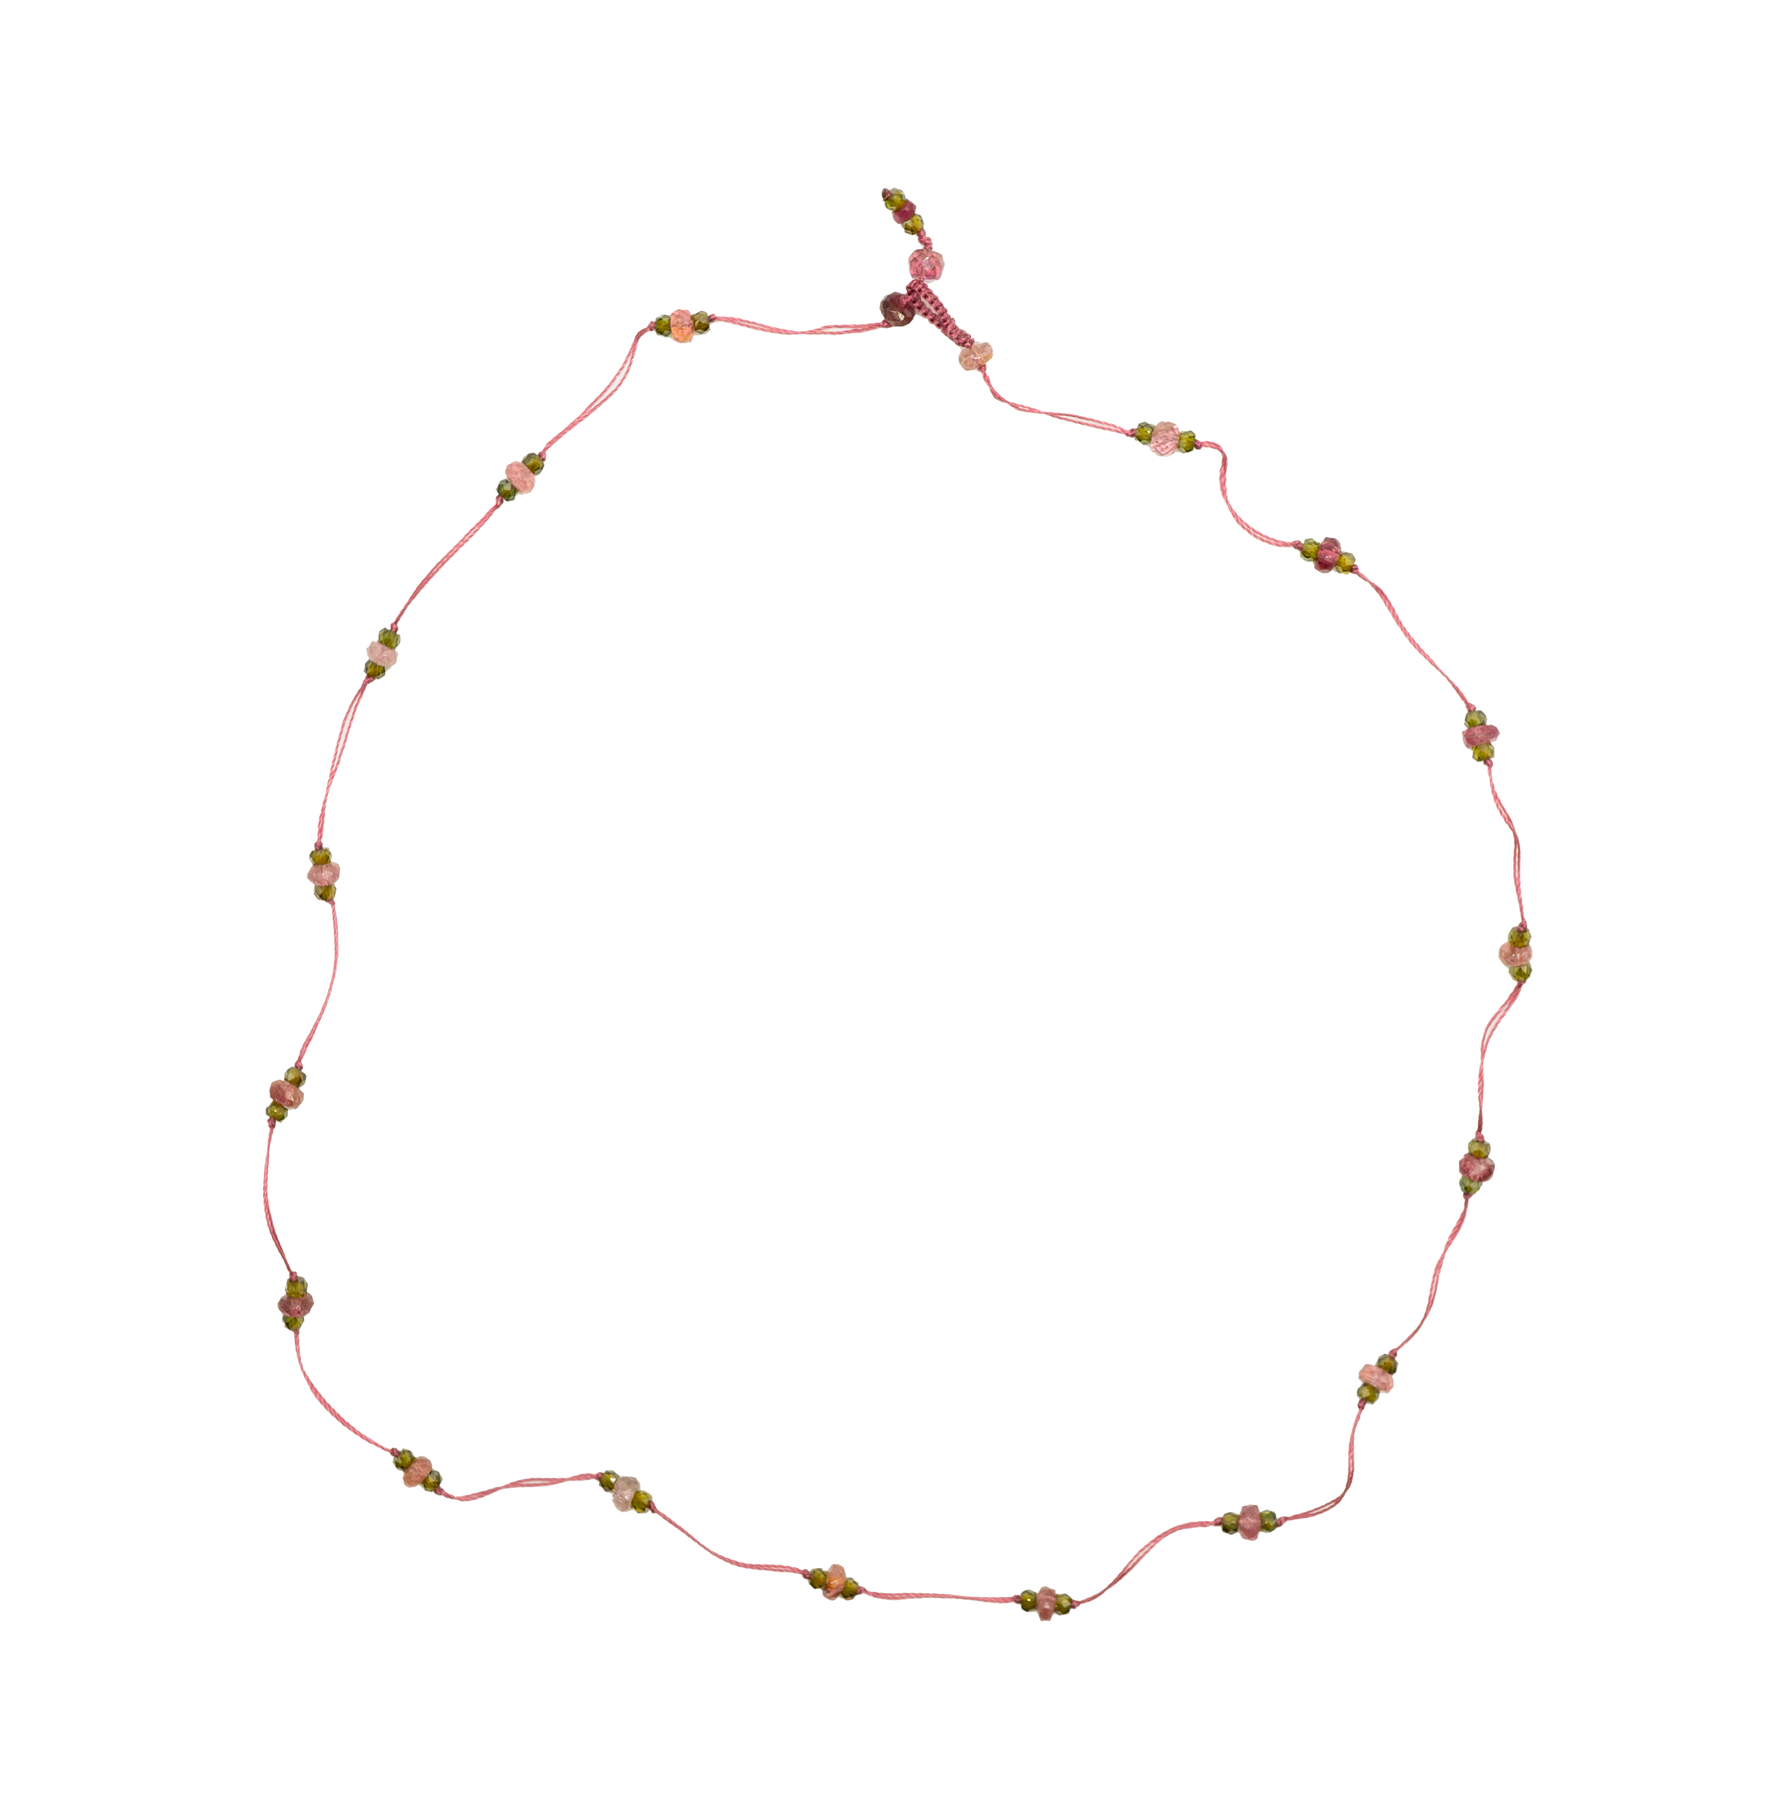 Loopy Duo - Pink Tourmalines &amp; Henna - Indian Pink Thread